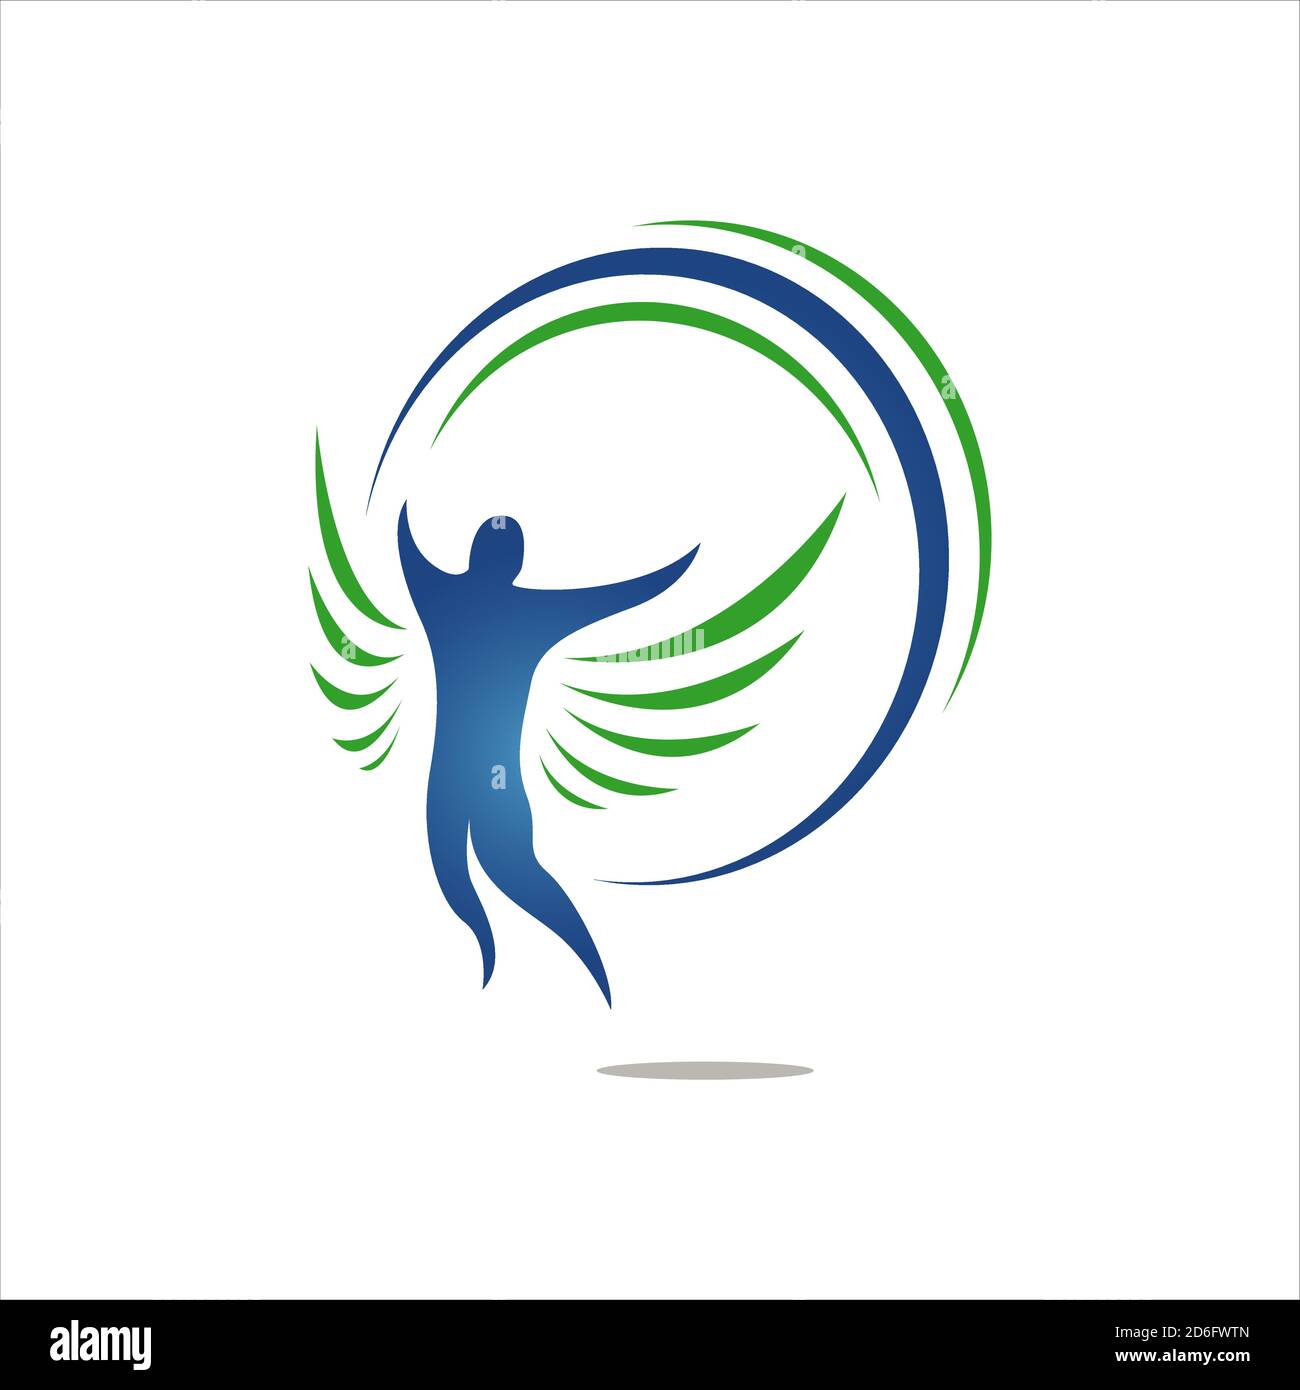 man flying with his wings freedom logo design vector illustration Stock Vector